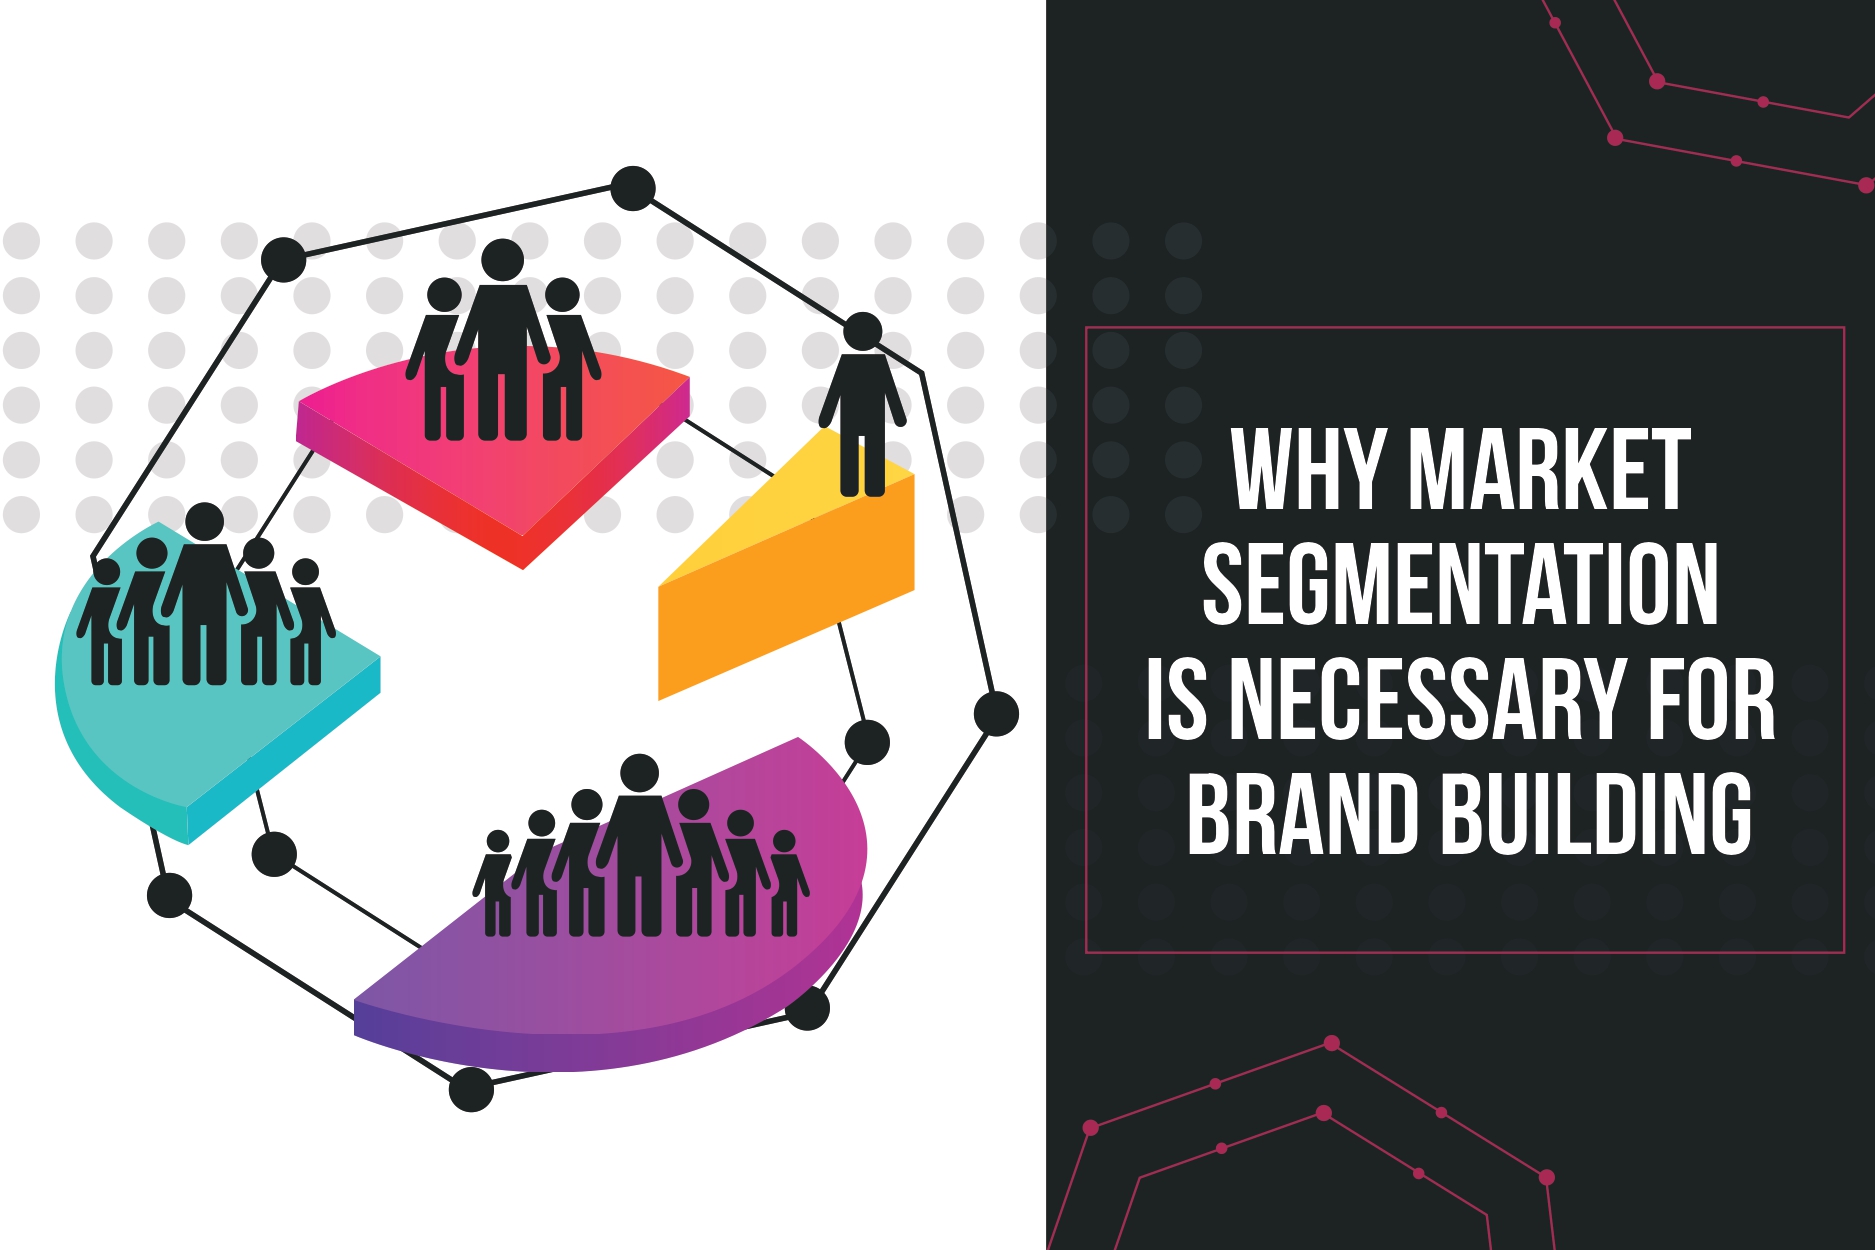 Why Market Segmentation Is Necessary For Brand Building